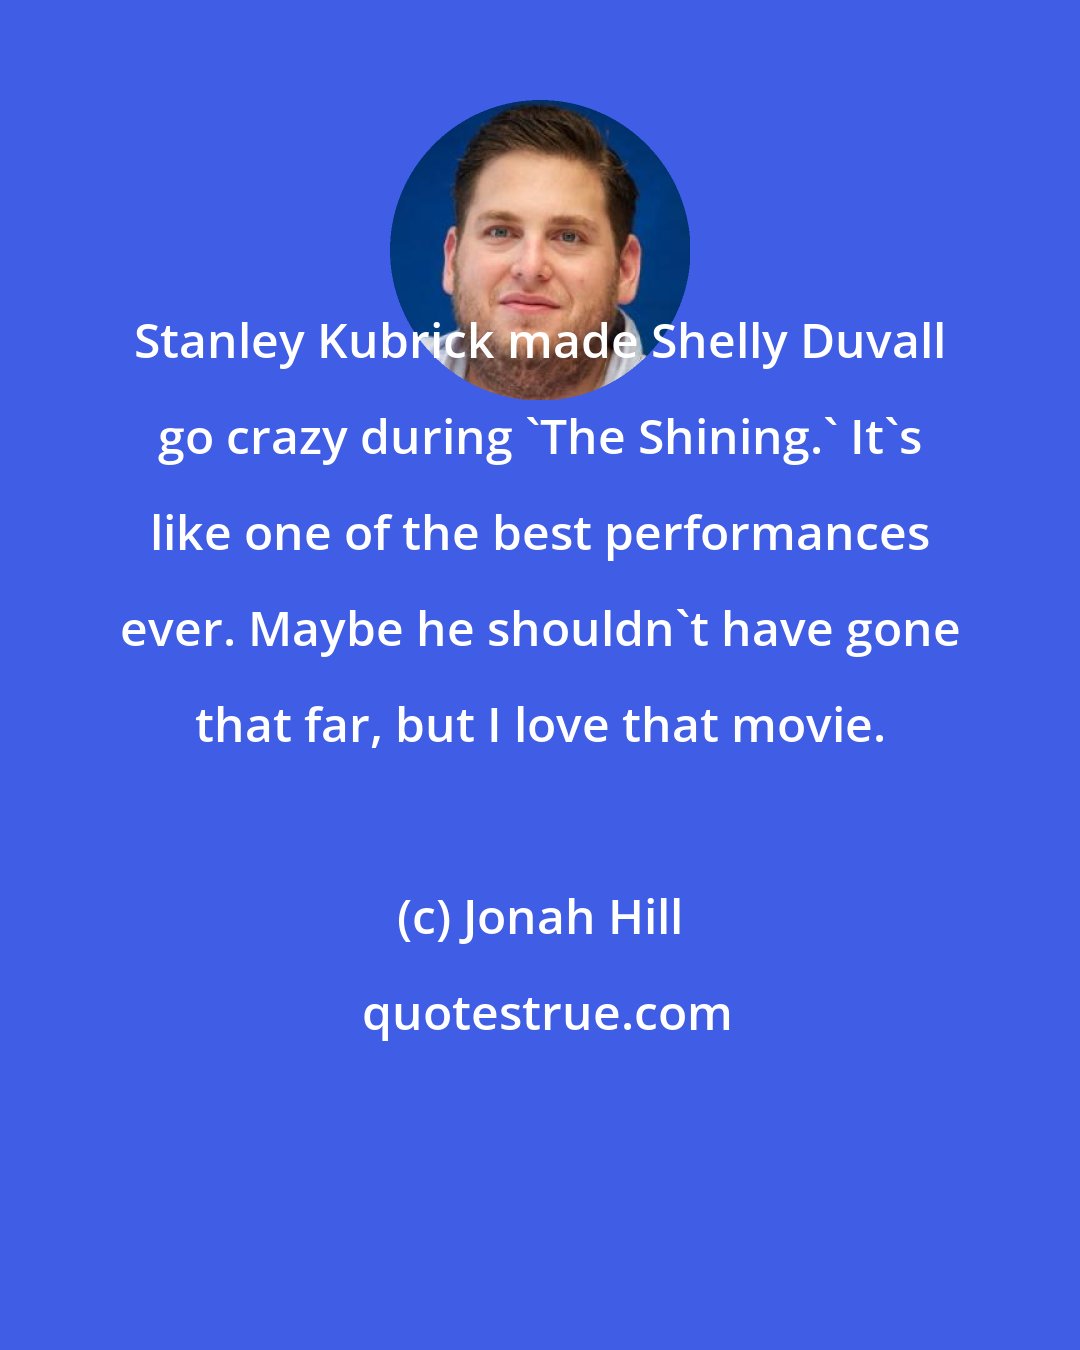 Jonah Hill: Stanley Kubrick made Shelly Duvall go crazy during 'The Shining.' It's like one of the best performances ever. Maybe he shouldn't have gone that far, but I love that movie.